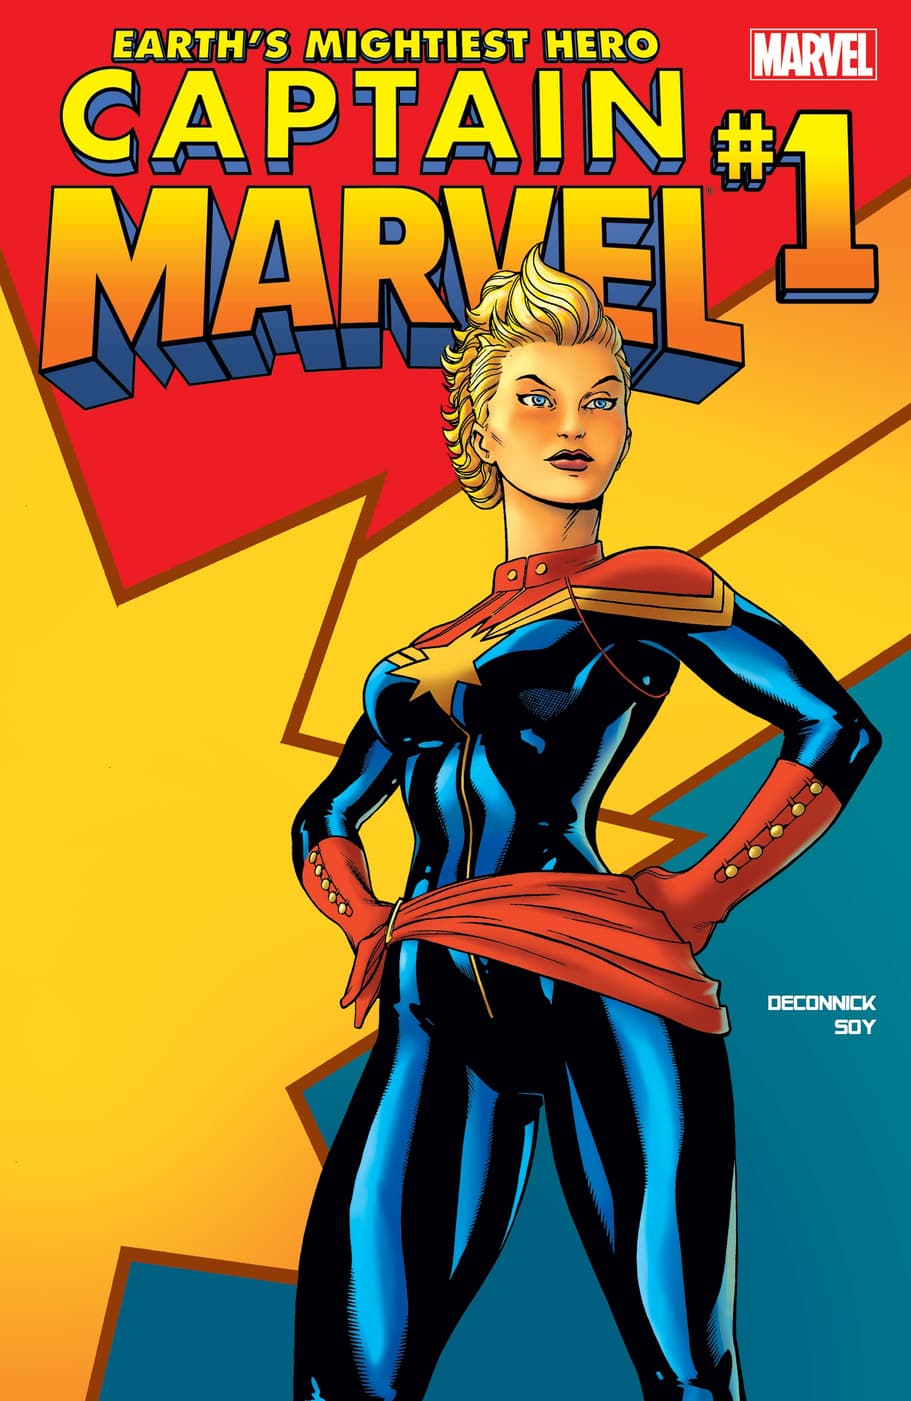 CAPTAIN MARVEL (2012) #1 cover by Ed McGuinness